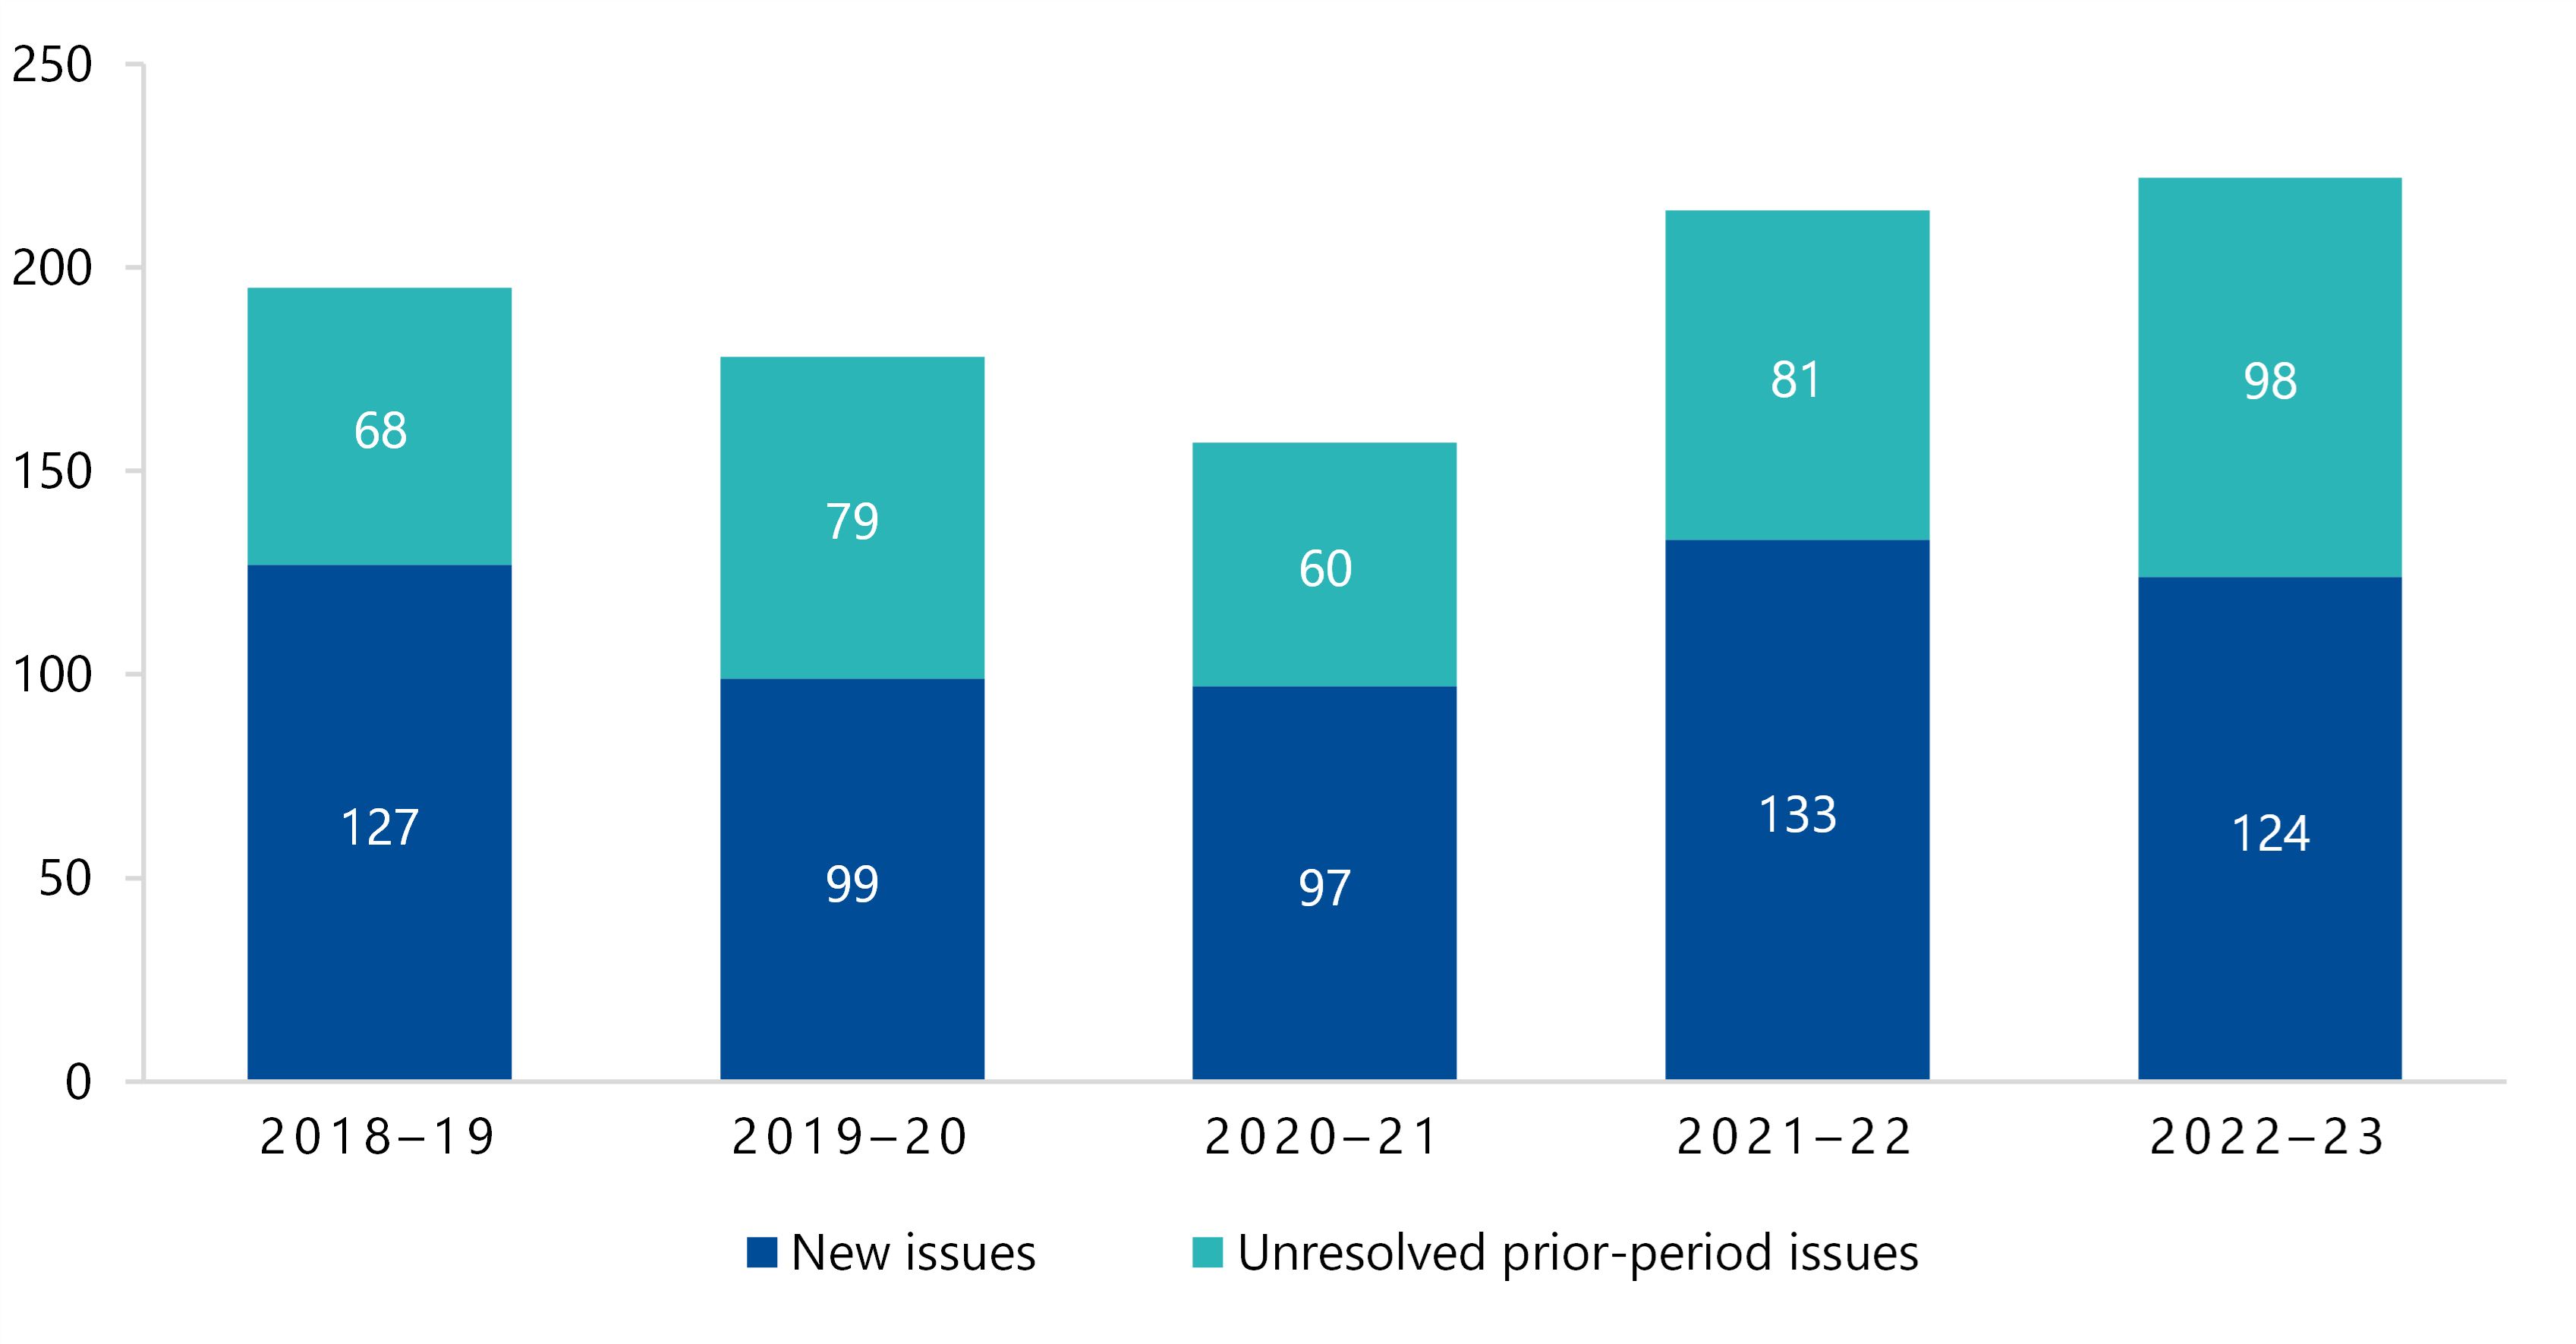 Figure 21 is a stacked bar graph showing that, across all councils in 2018–19, there were 127 new issues and 68 unresolved prior-period issues. In 2019–20, there were 99 new issues and 79 prior-period issues. In 2020–21, there were 97 new issues and 60 prior-period issues. In 2021–22, there were 133 new issues and 81 prior-period issues. In 2022–23, there were 124 new issues and 98 prior-period issues. 